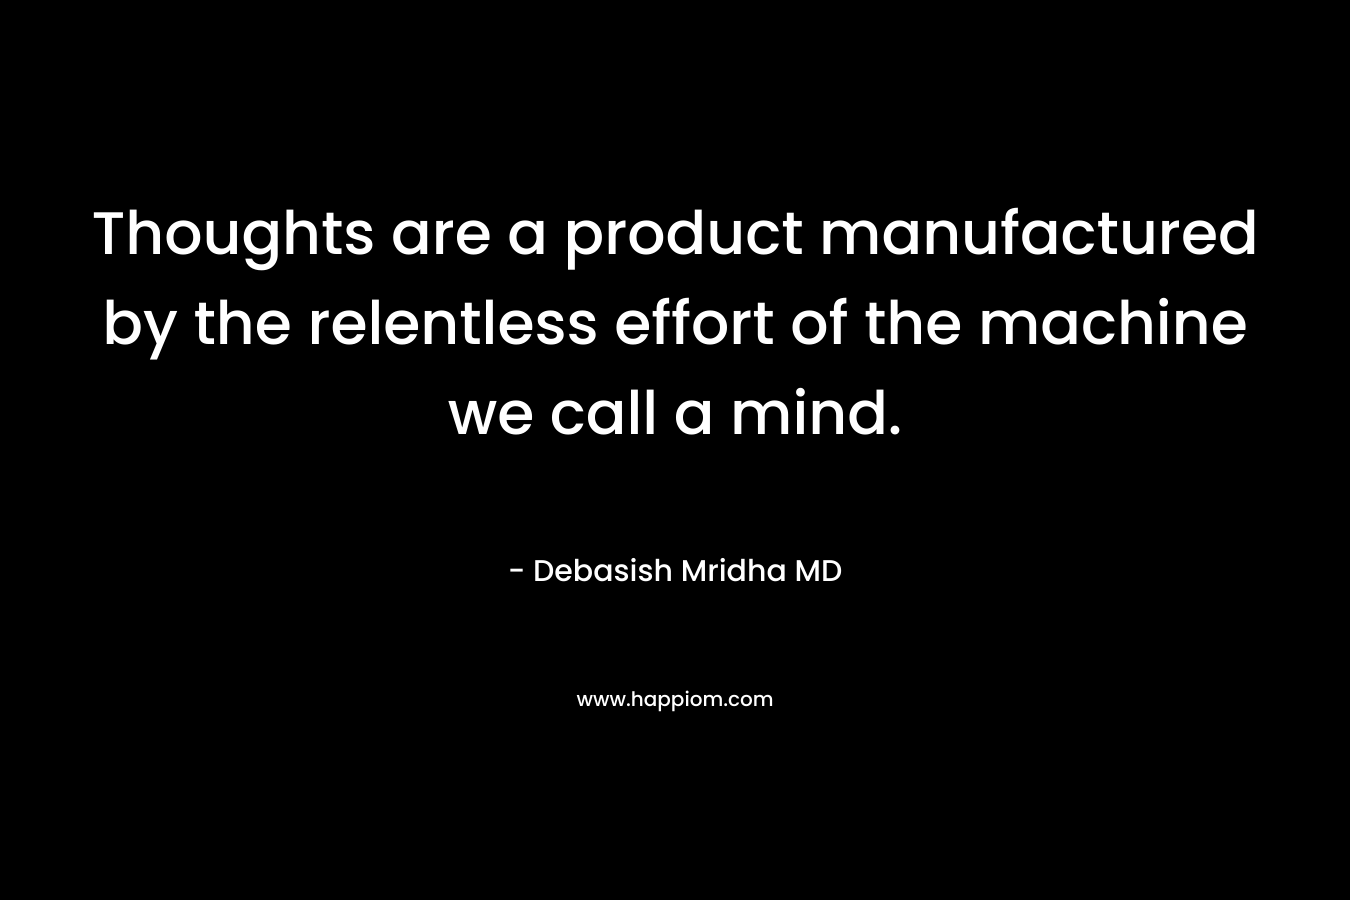 Thoughts are a product manufactured by the relentless effort of the machine we call a mind. – Debasish Mridha MD